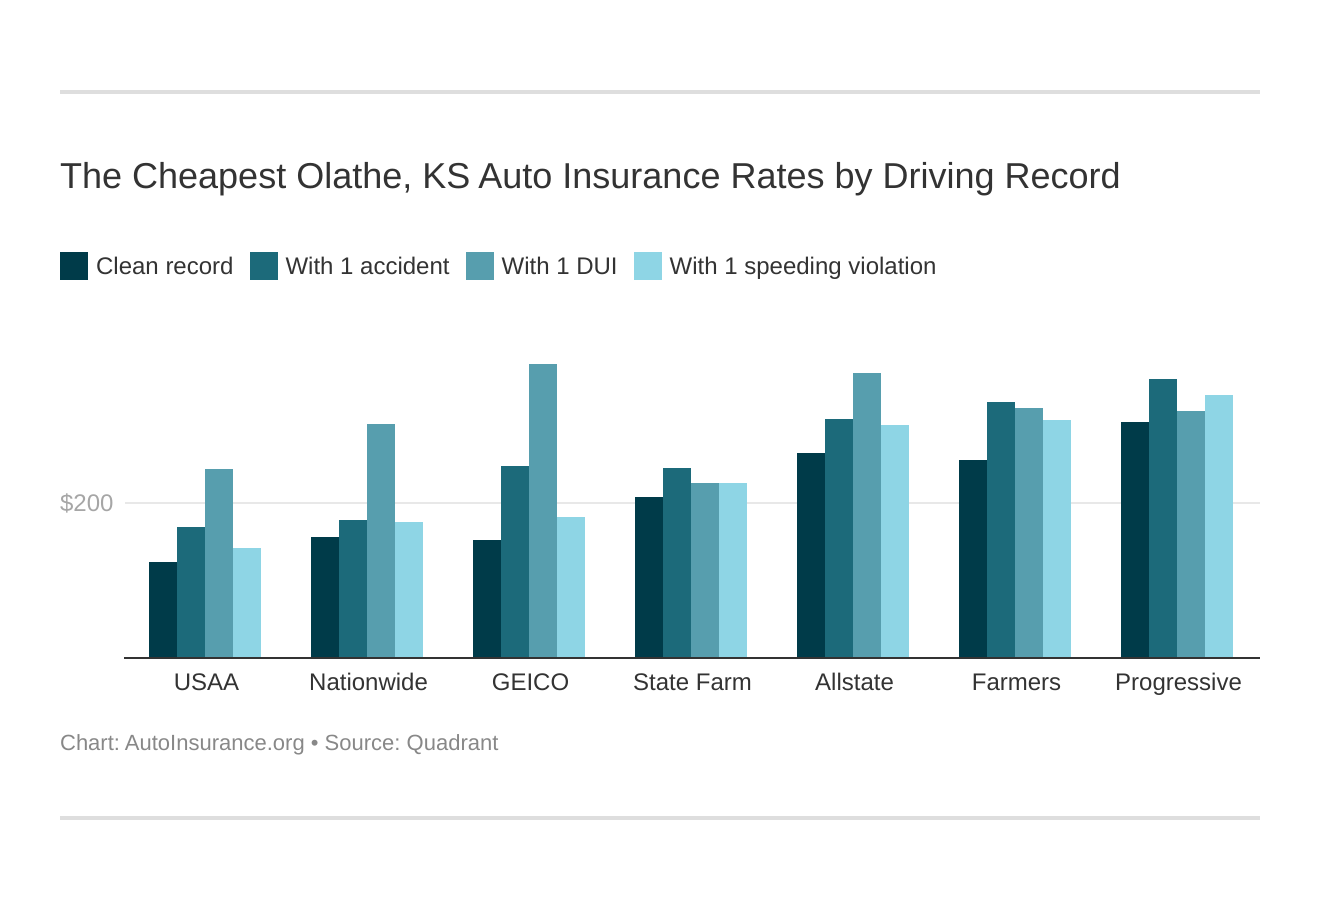 The Cheapest Olathe, KS Auto Insurance Rates by Driving Record